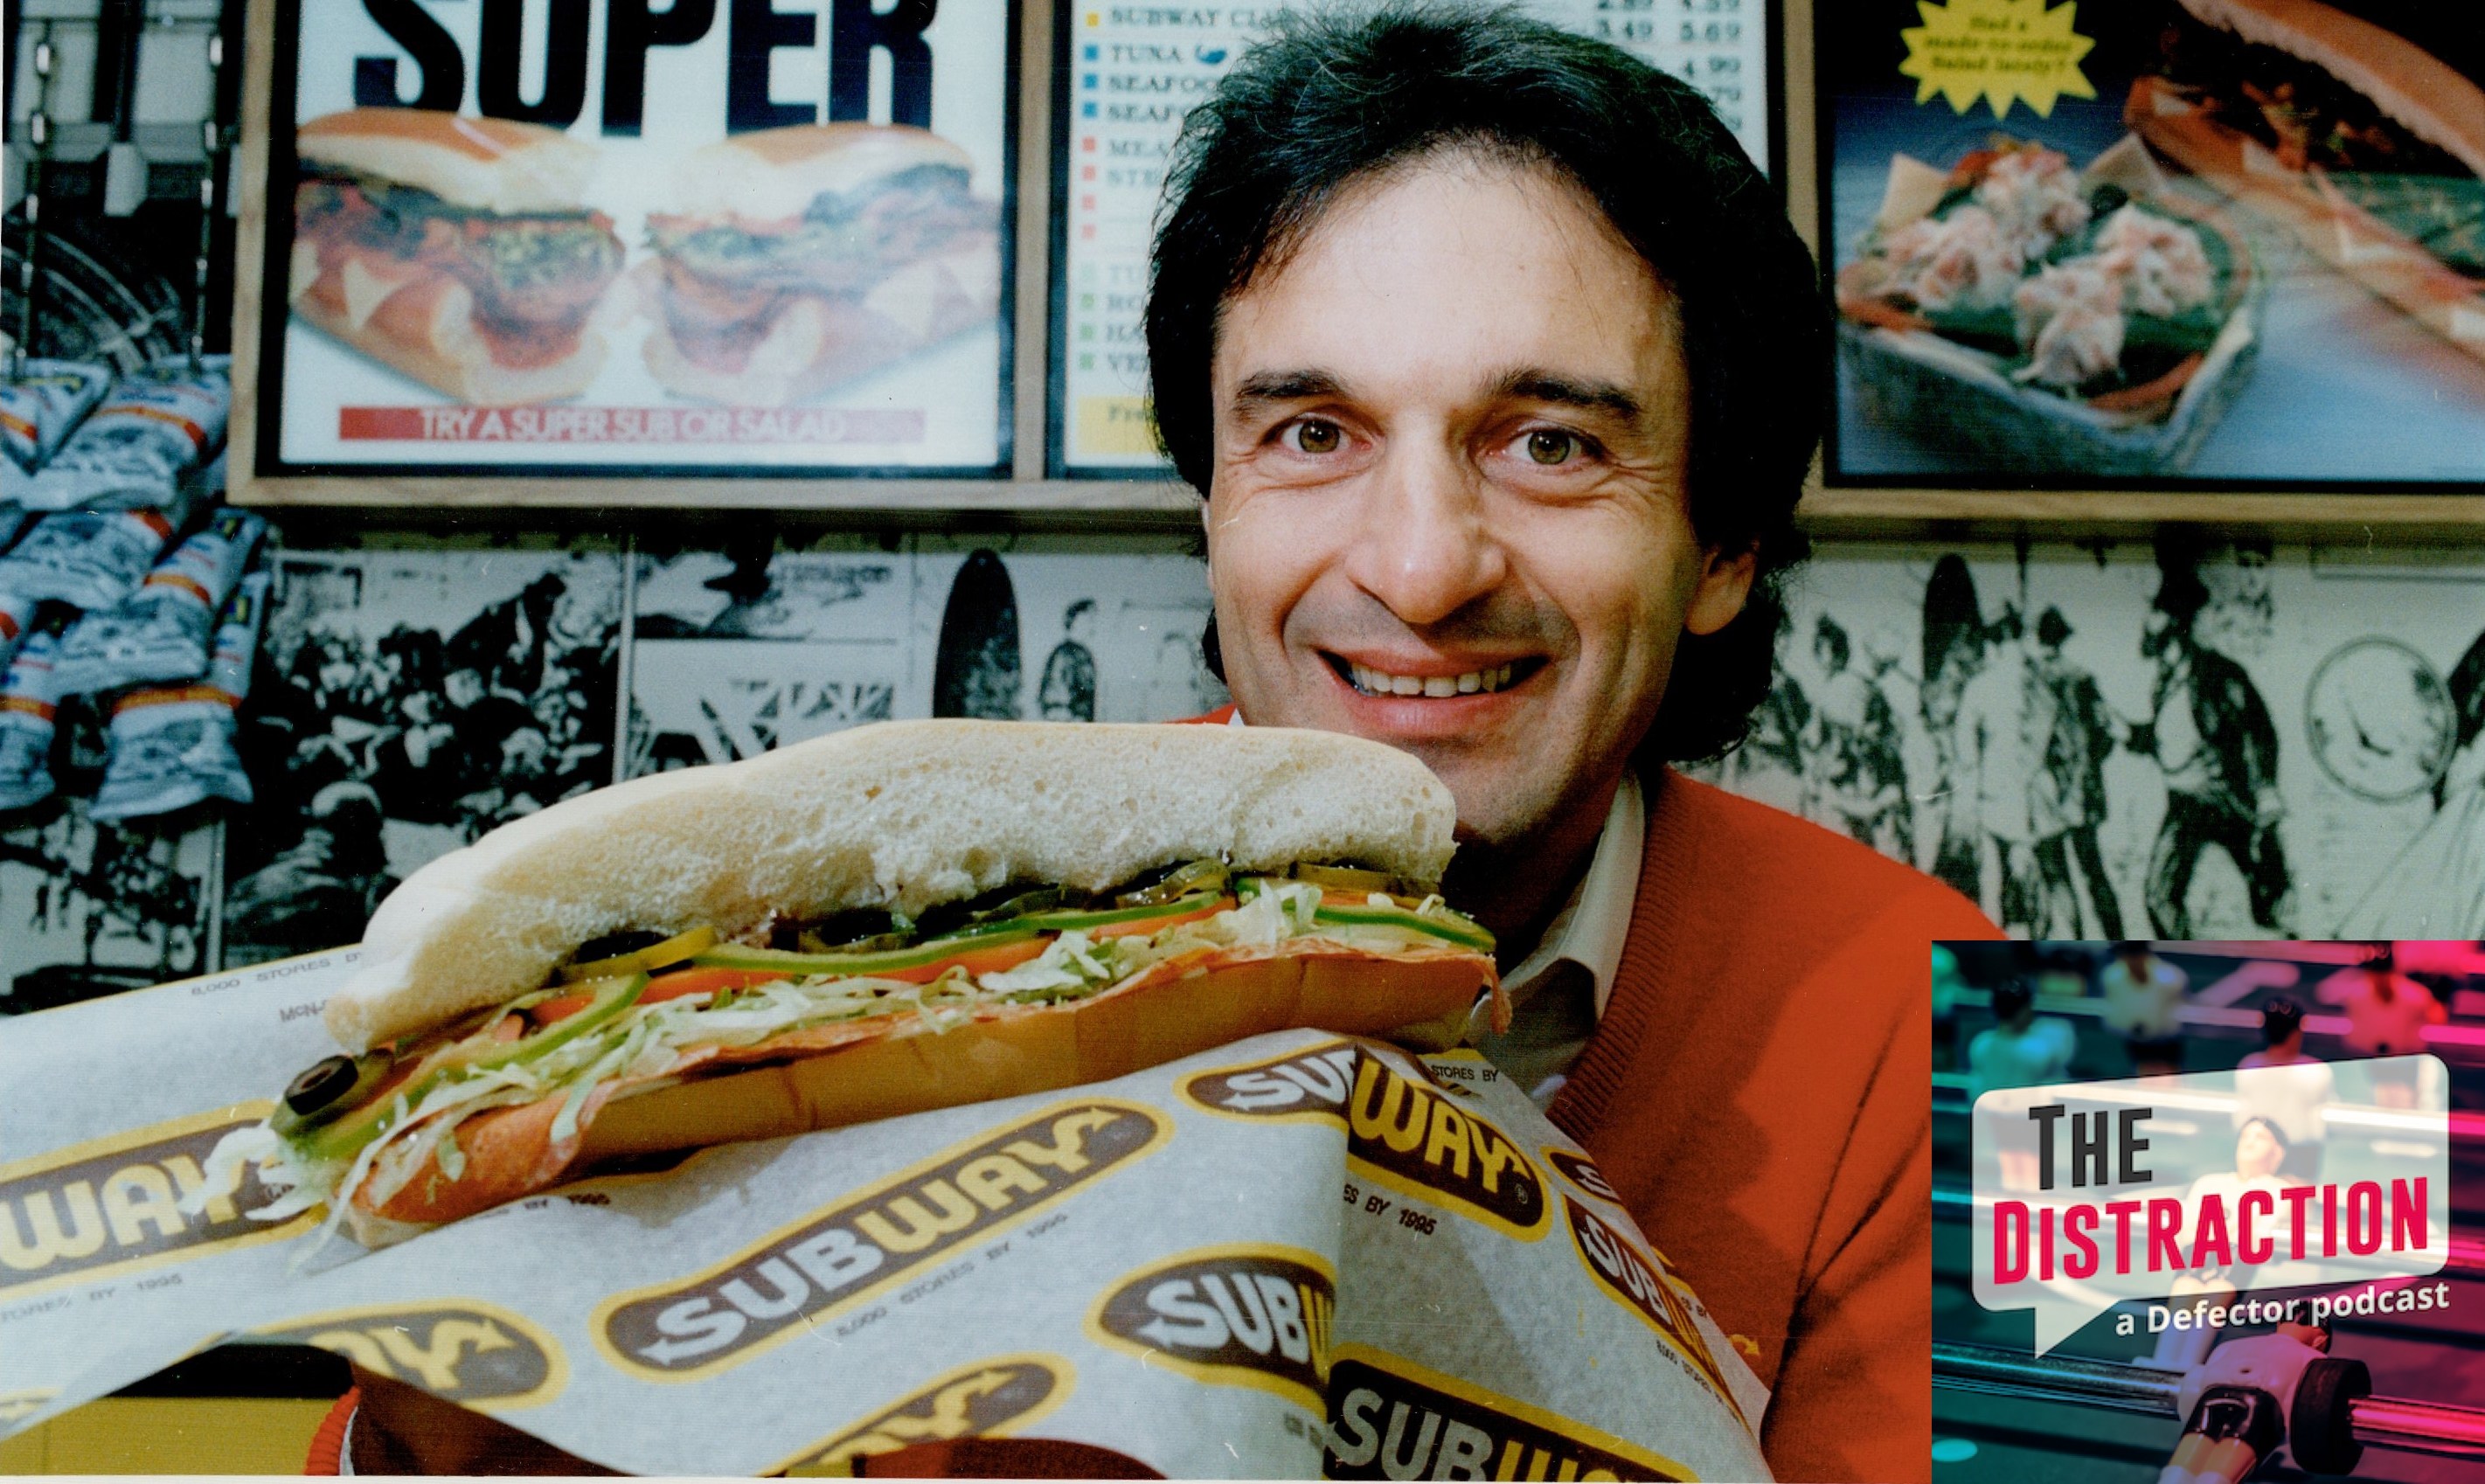 o-founder of Subway, Fred DeLuca poses for a portrait in February 1991 in Toronto Canada.